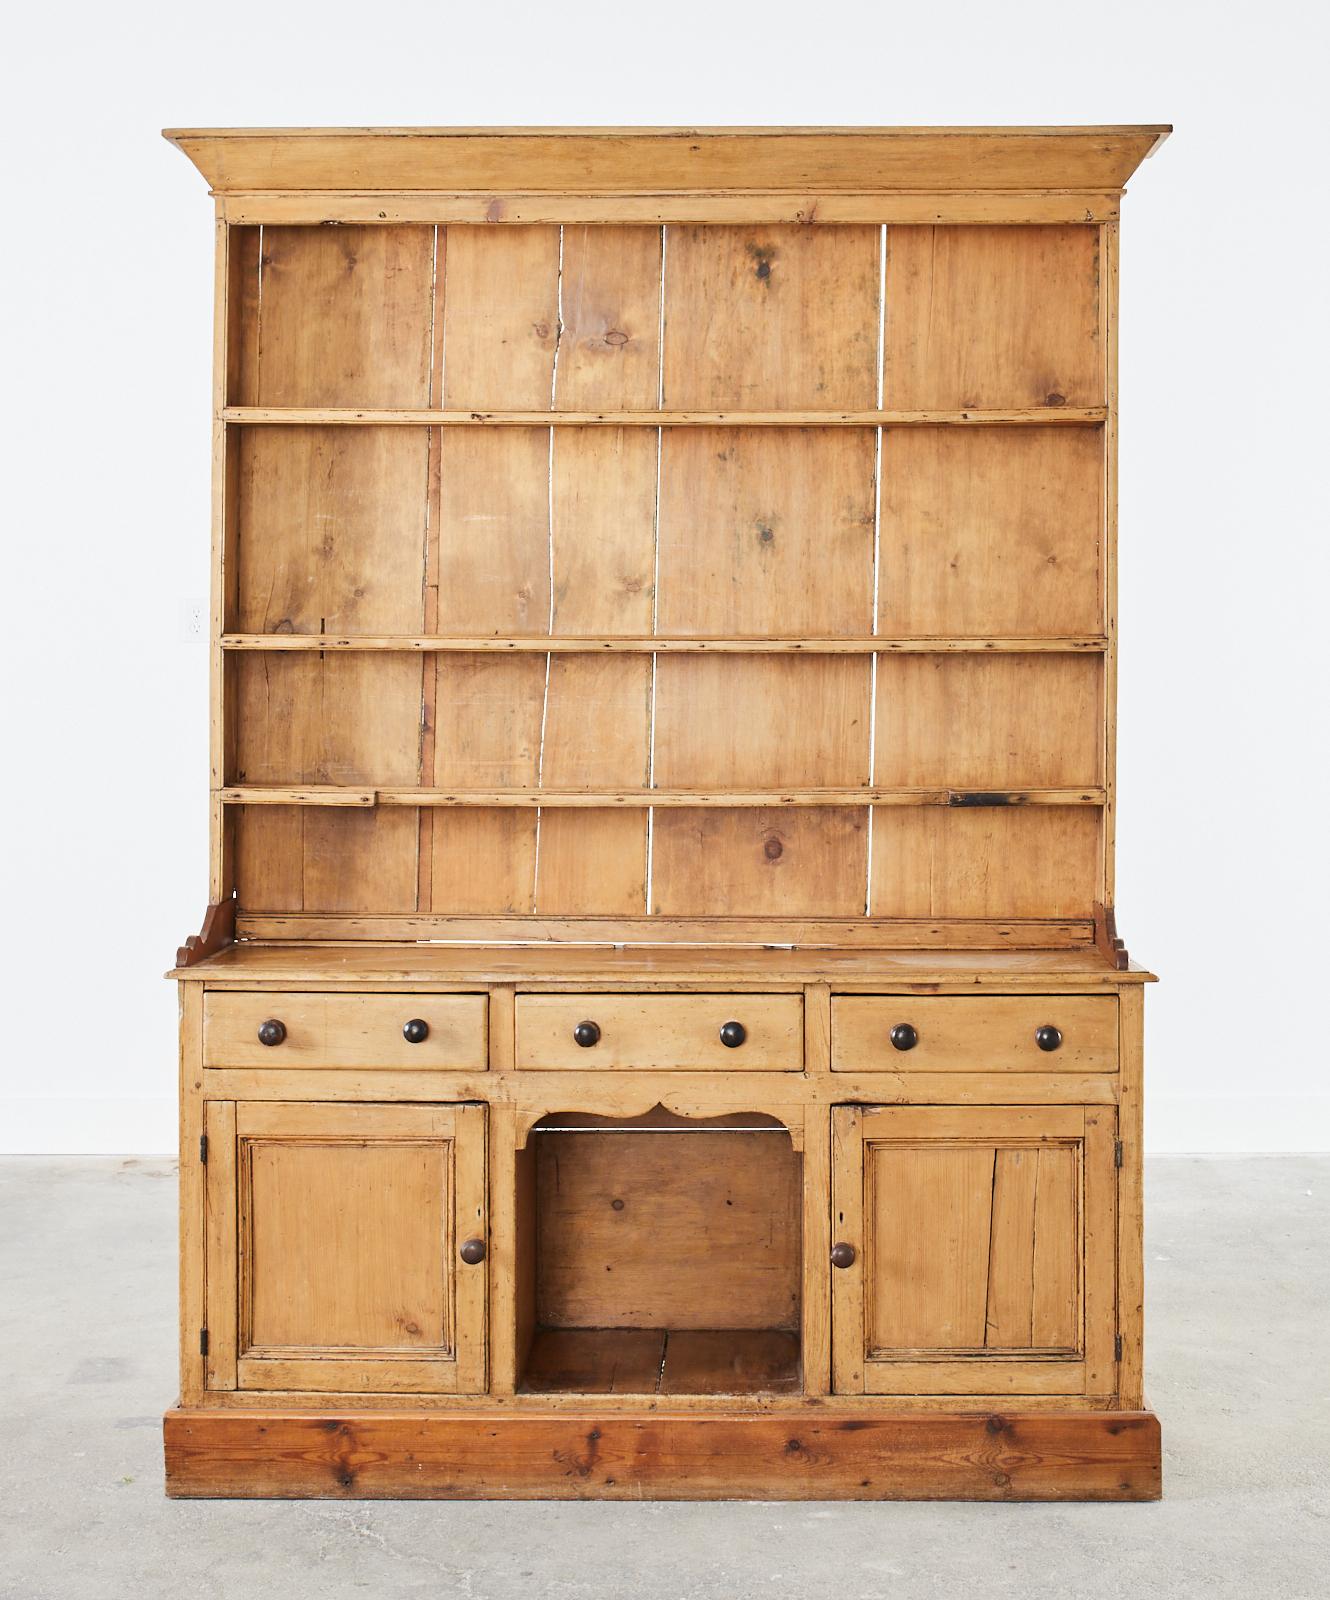 Hand-Crafted 19th Century Country French Provincial Pine Farmhouse Cupboard